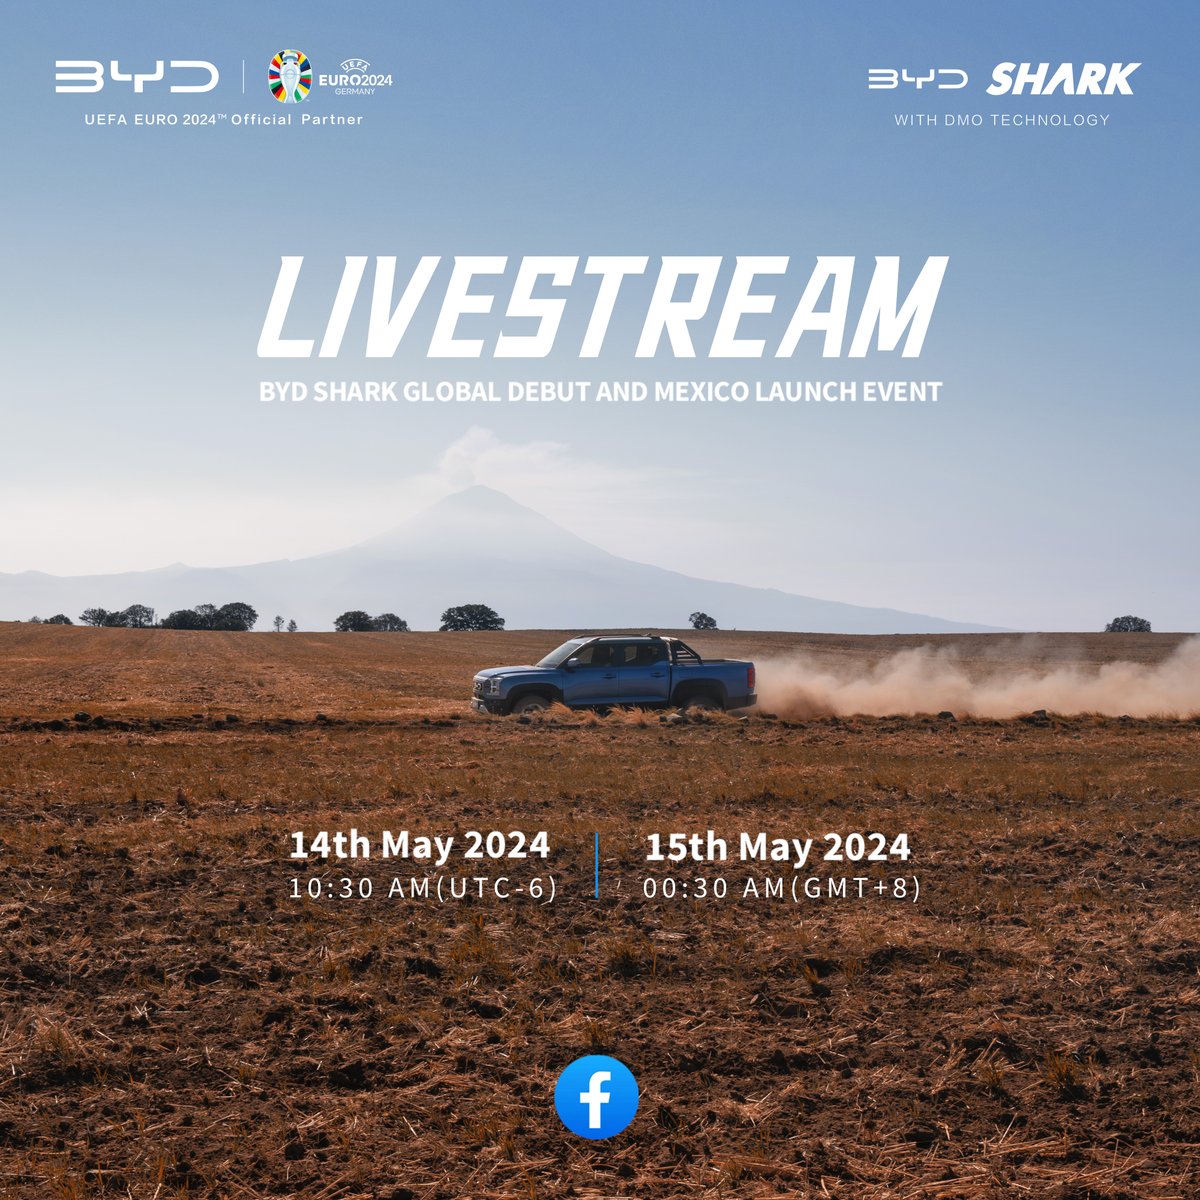 Mark your calendars for the global debut and launch event of the BYD SHARK in Mexico City, Mexico, happening on May 14th at 10:30 AM (UTC-6). 

👀 Stay tuned for the live stream and be part of this exciting unveiling!

#BYD #BuildYourDreams #BYDSHARK